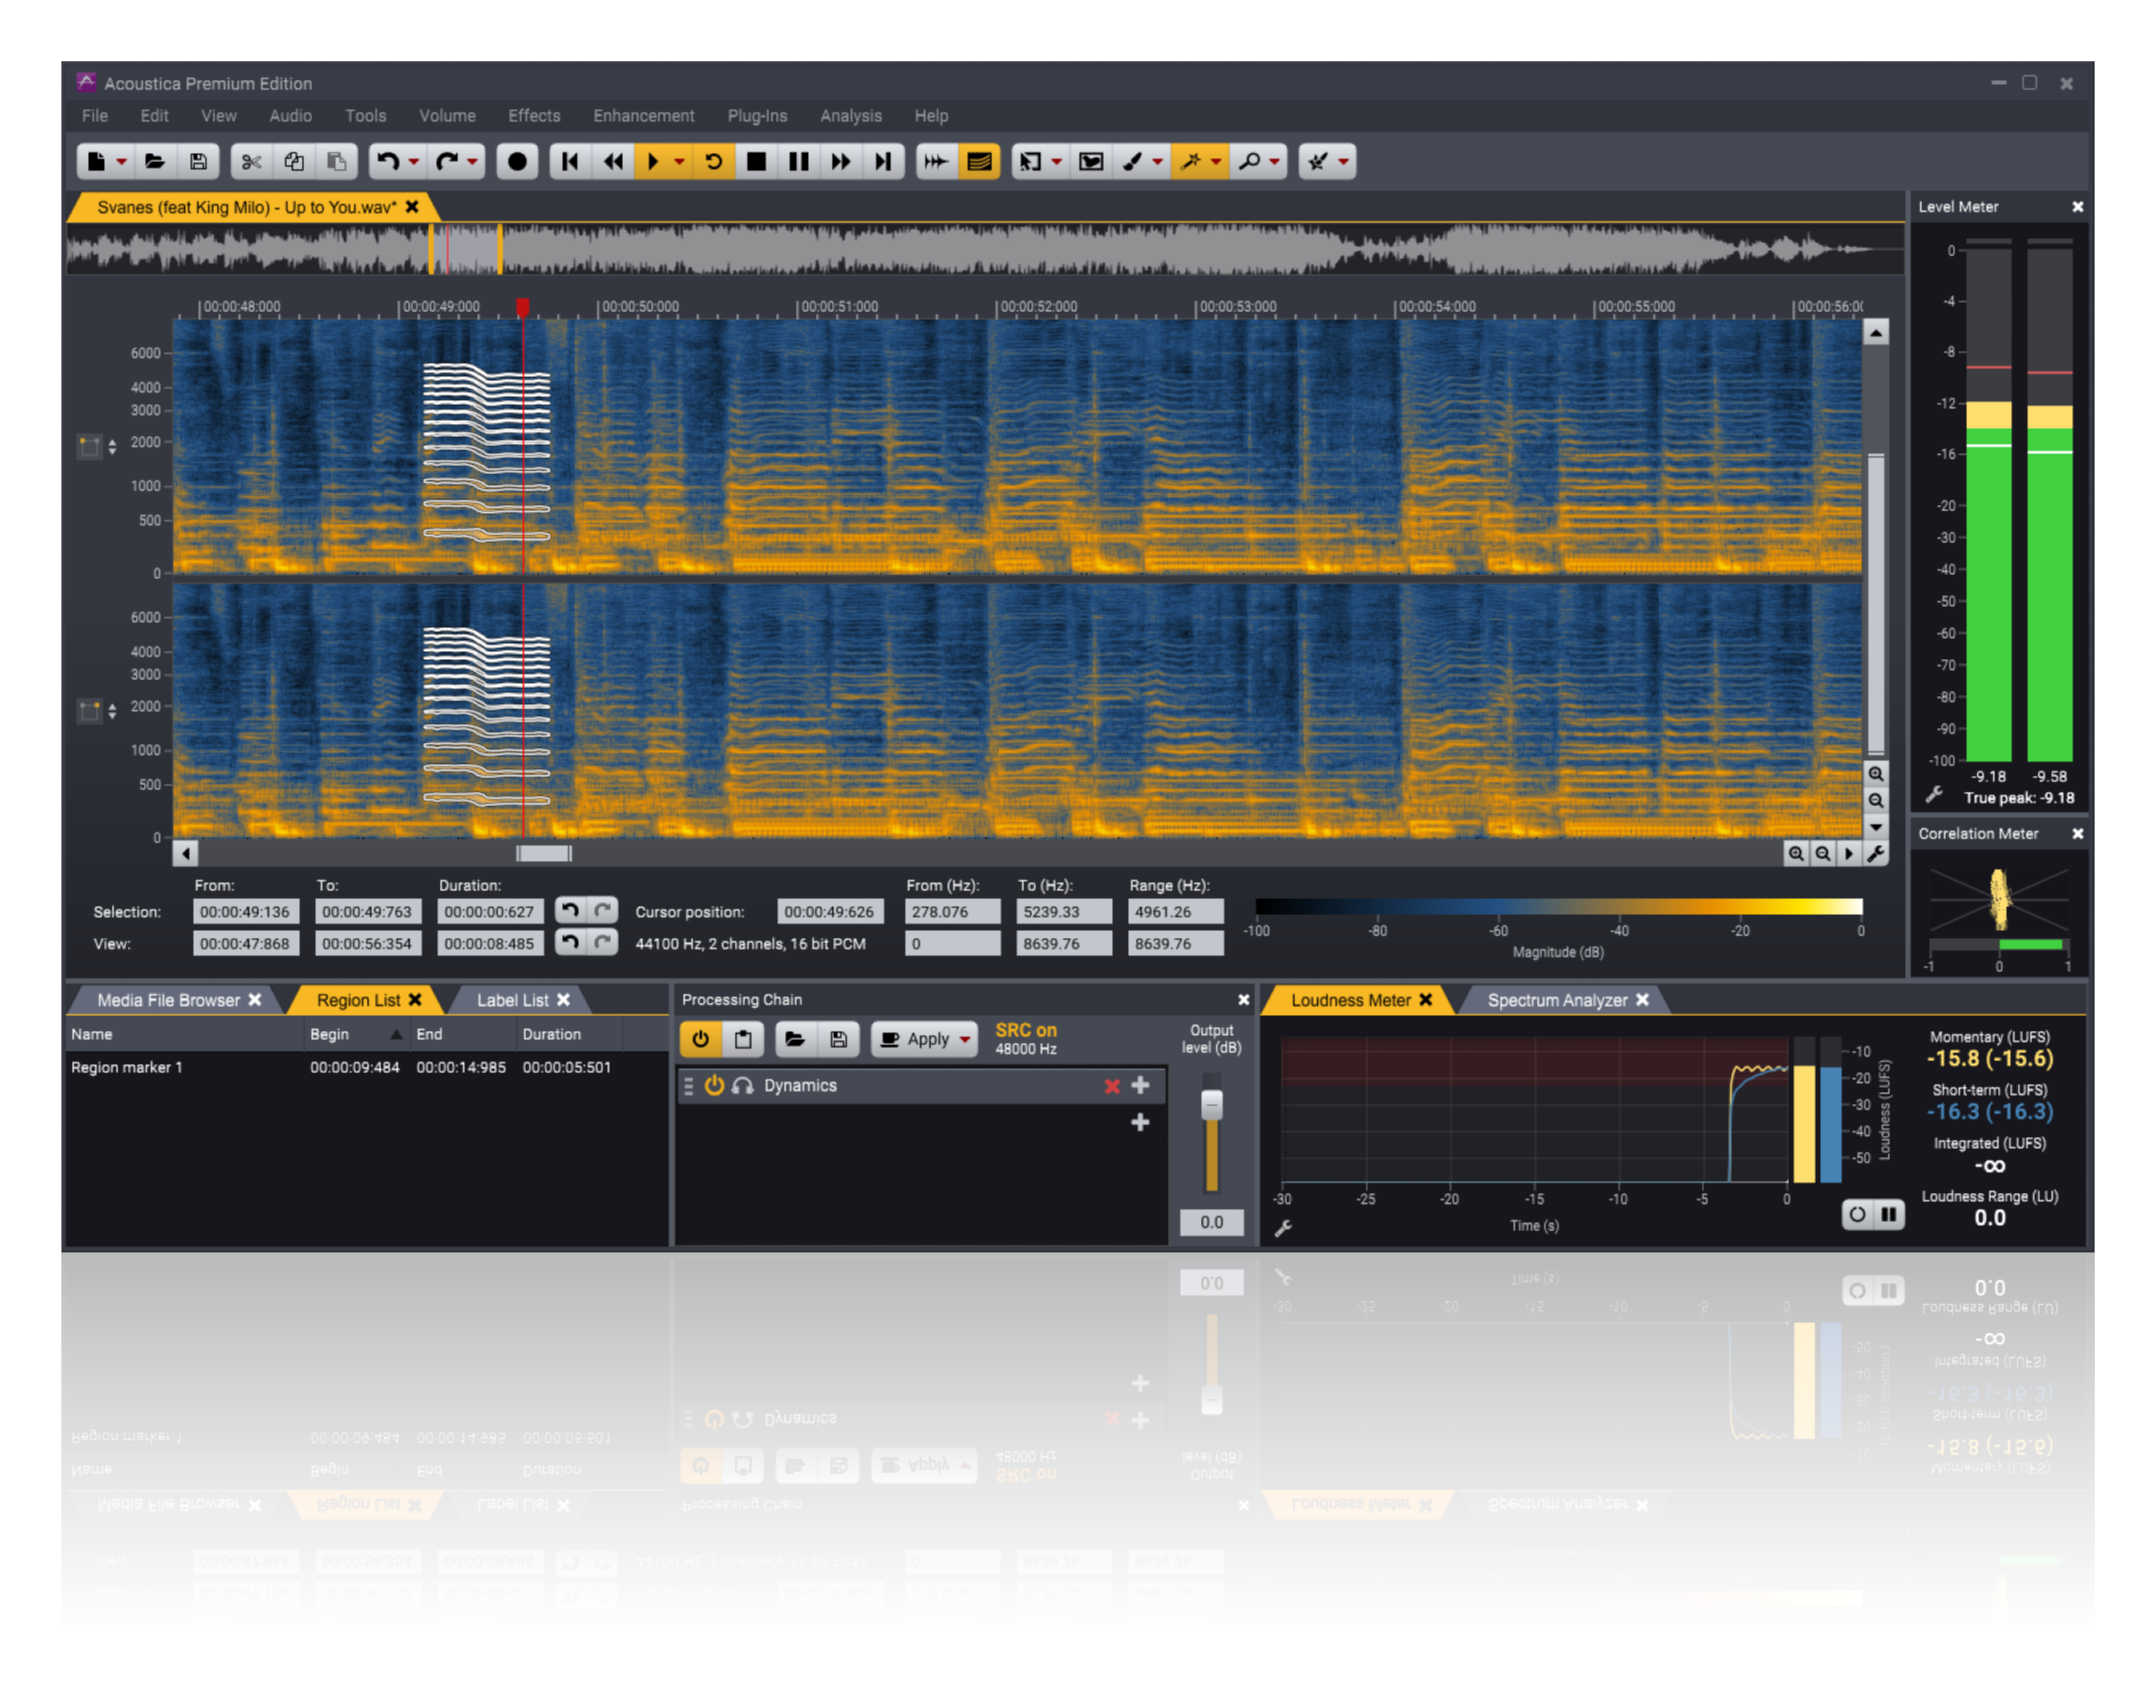 Acoustica for Mac 7.4.1